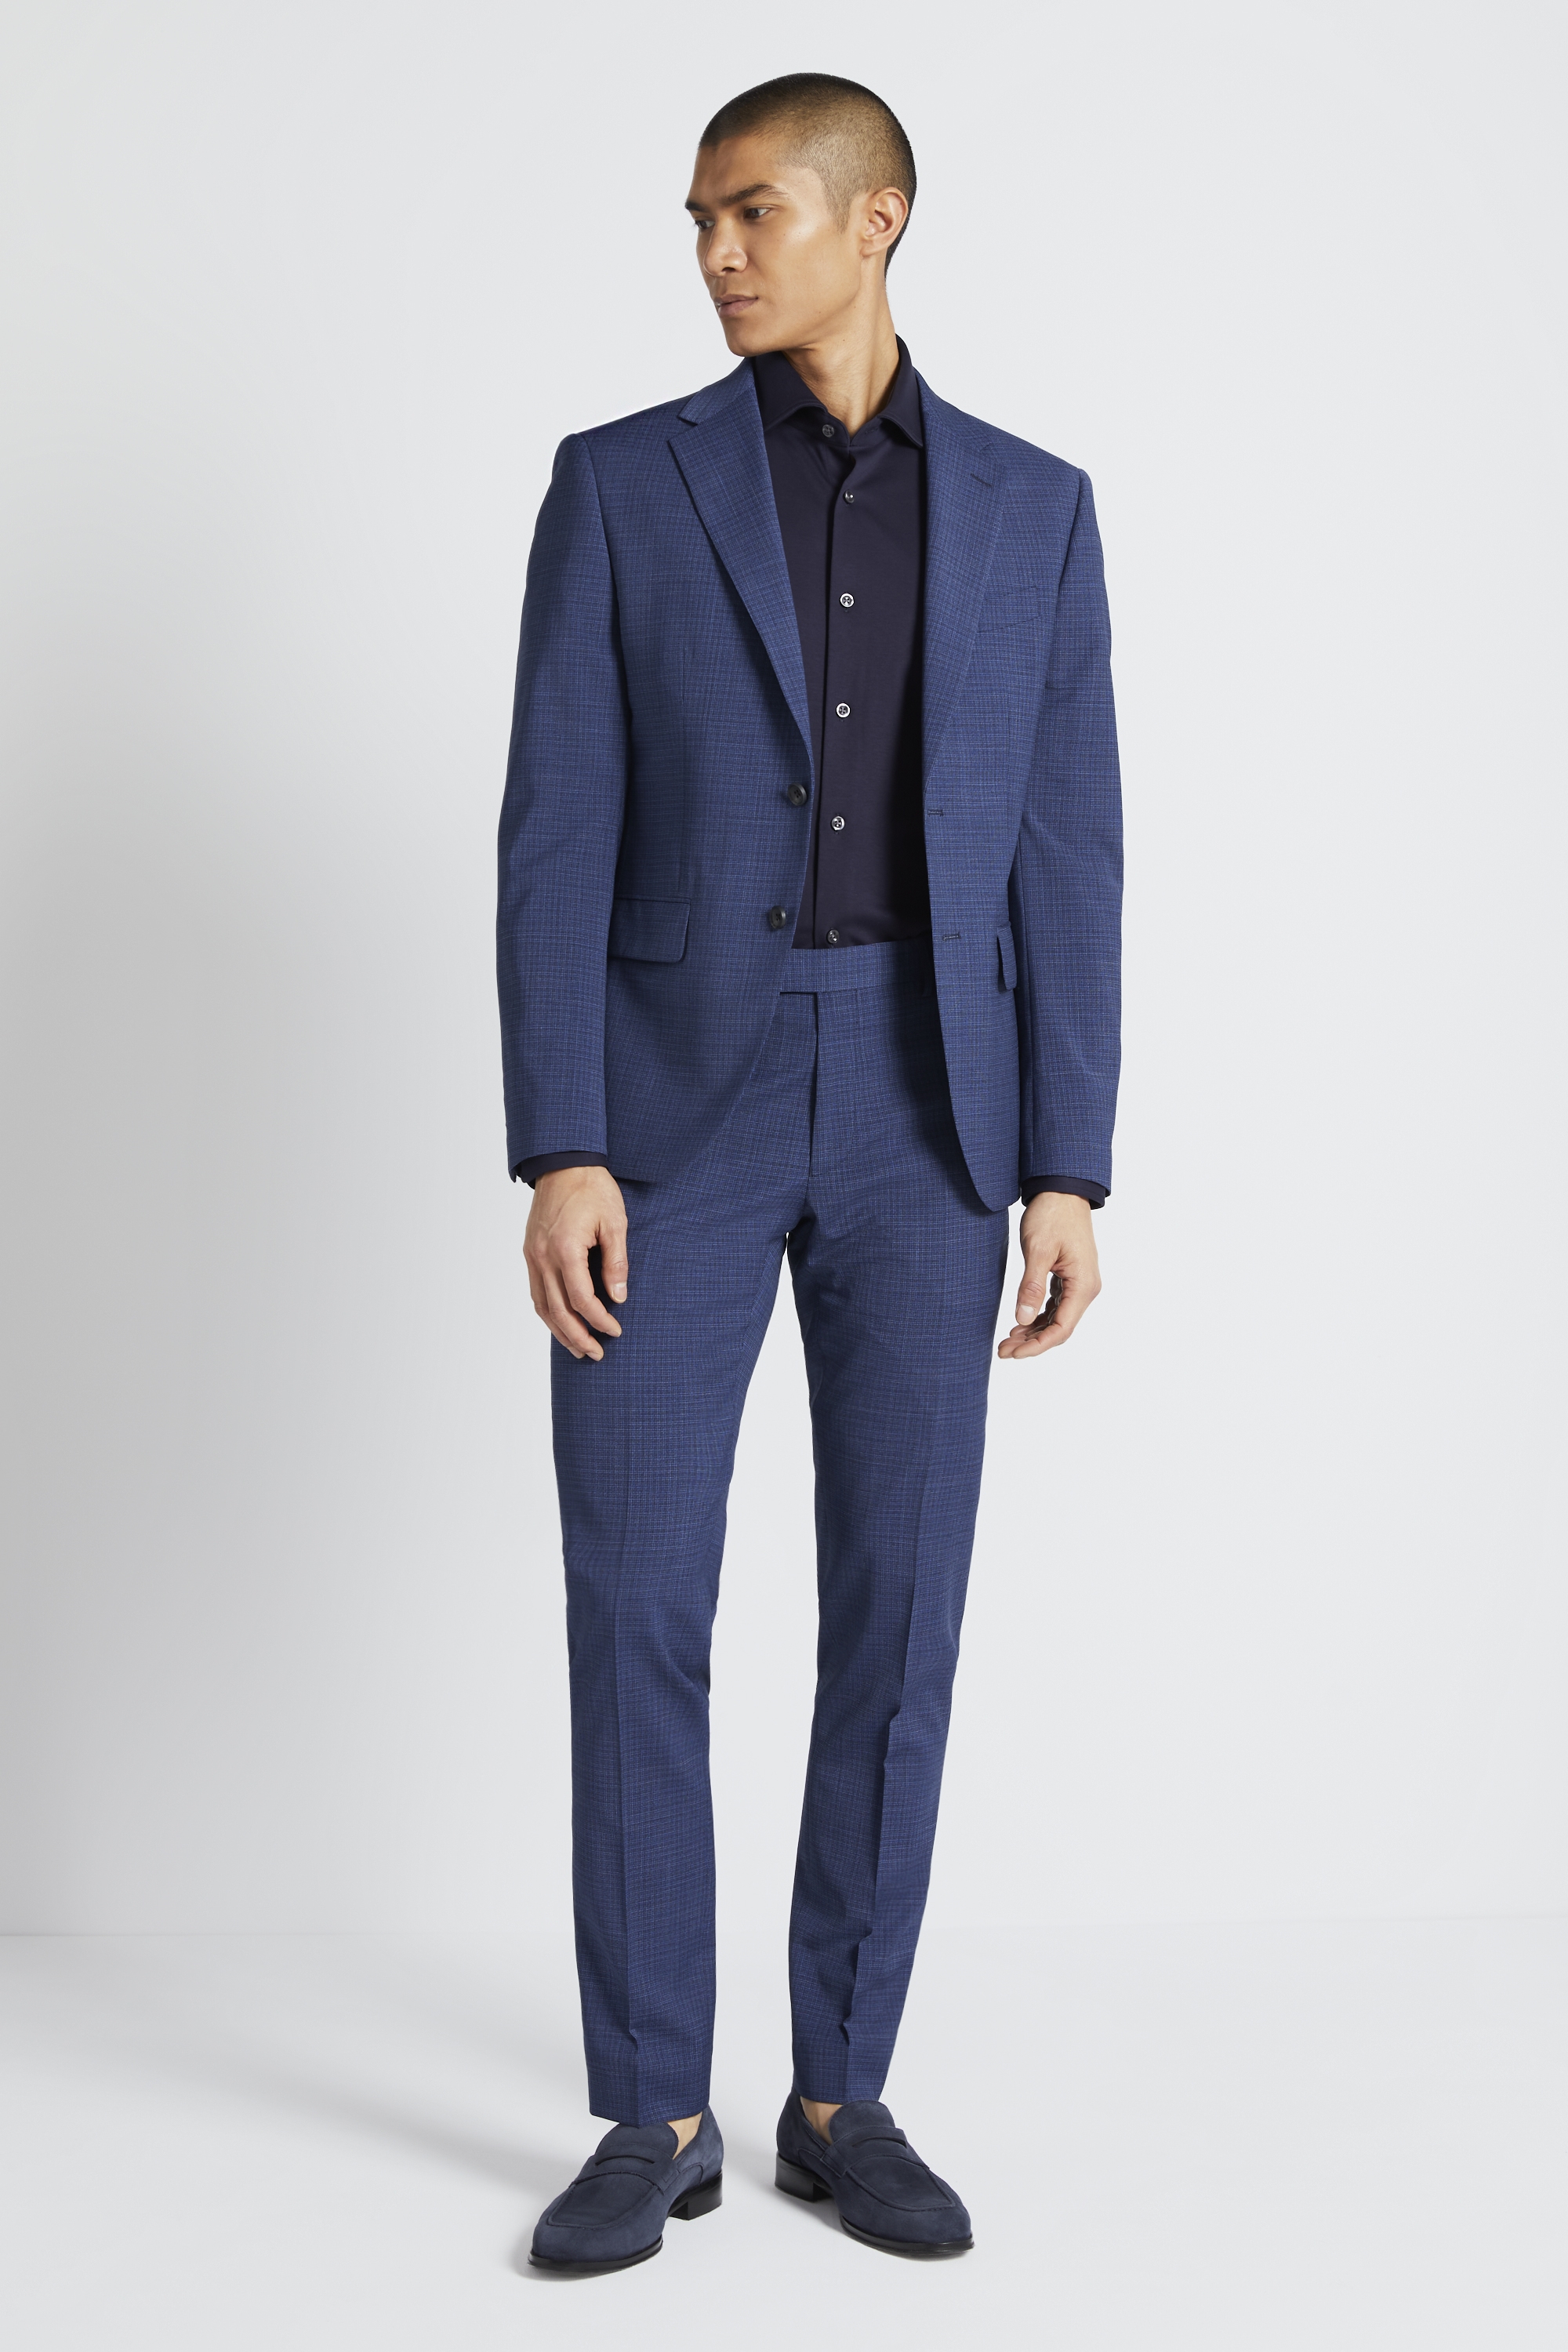 DKNY Slim Fit Bright Blue Jacket | Buy Online at Moss